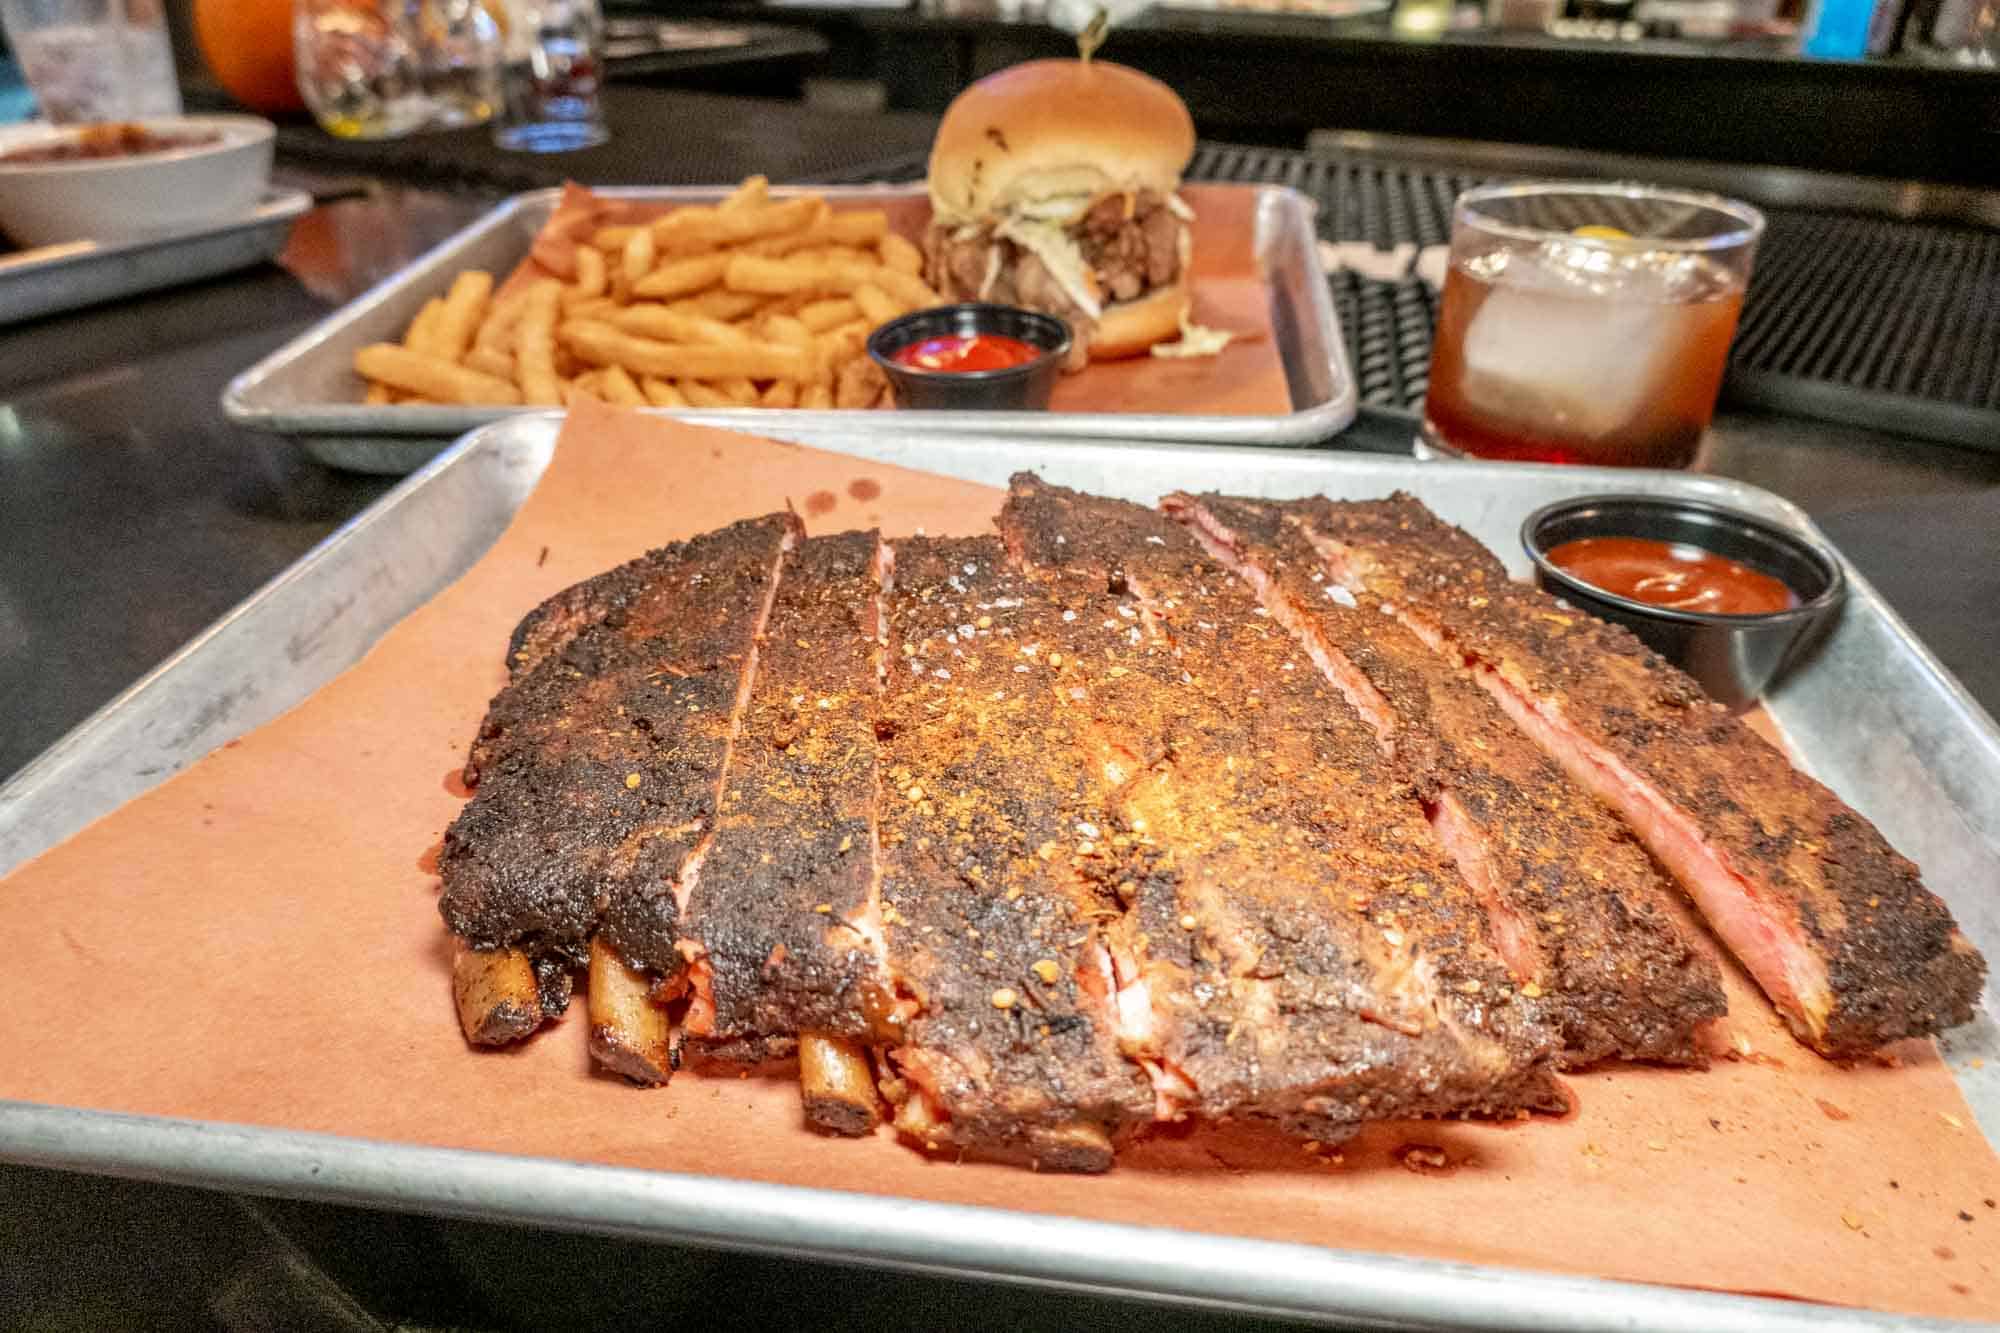 BBQ ribs on a tray in front of a tray with a sandwich and French fries